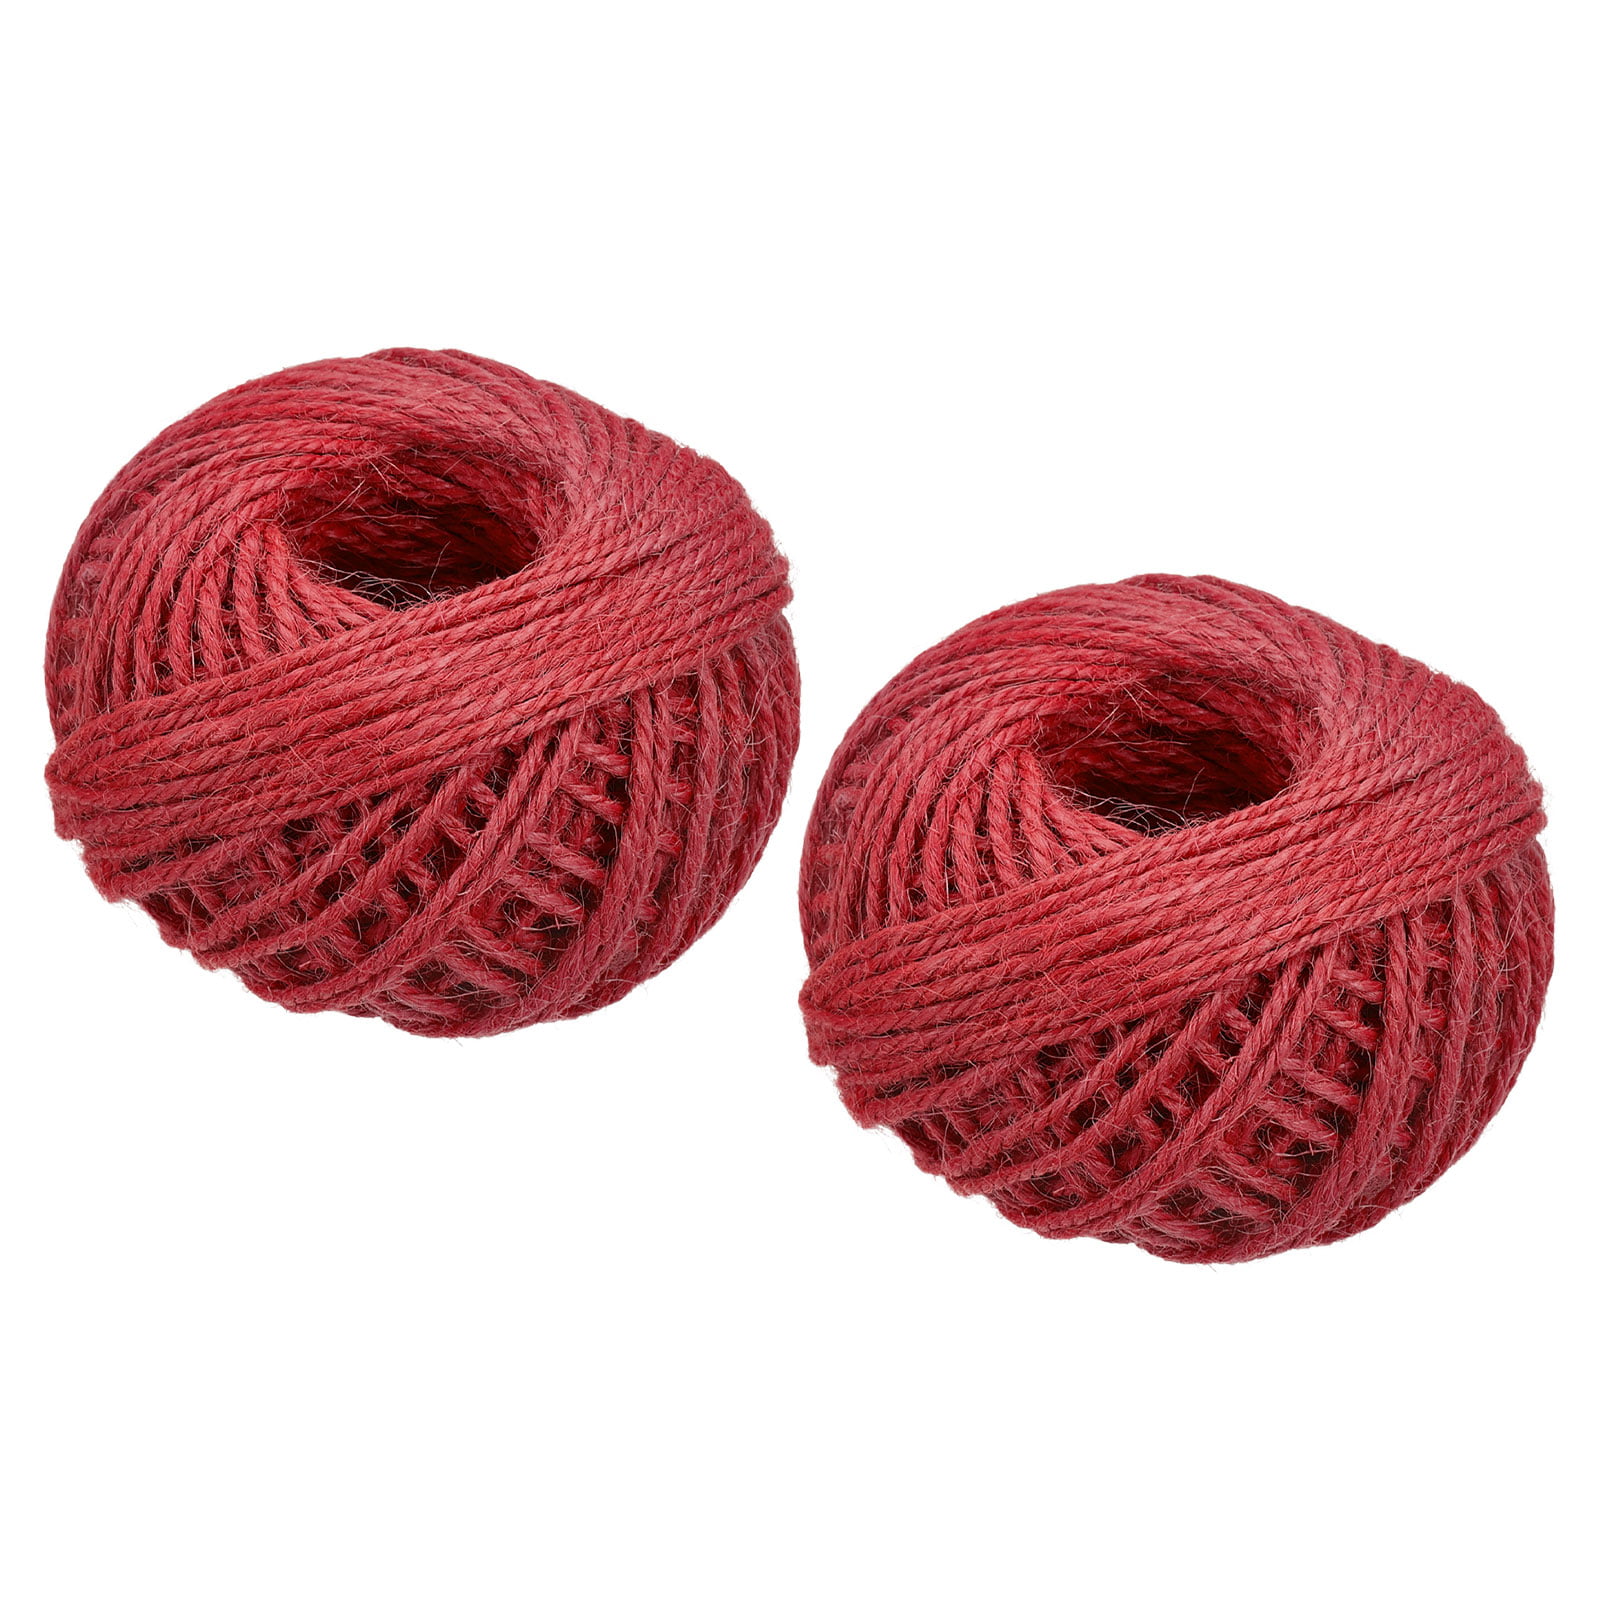 Uxcell 164 Feet 2mm Jute Twine, Jute Rope for Craft Projects Red 2 Pack, Women's, Size: One Size